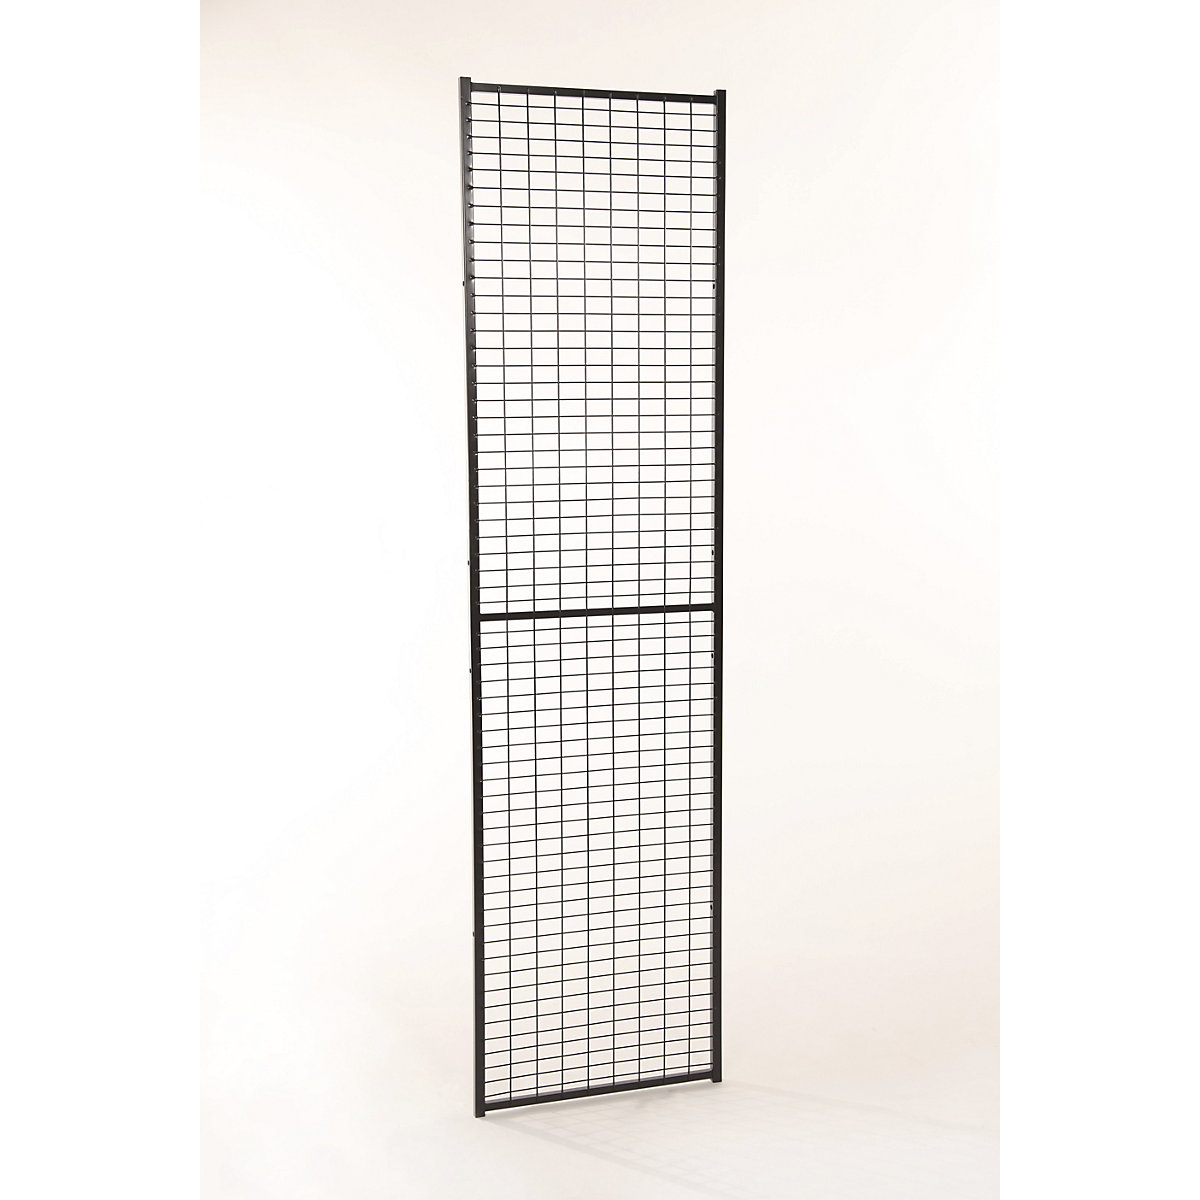 X-GUARD LITE machine protective fencing, wall section - Axelent